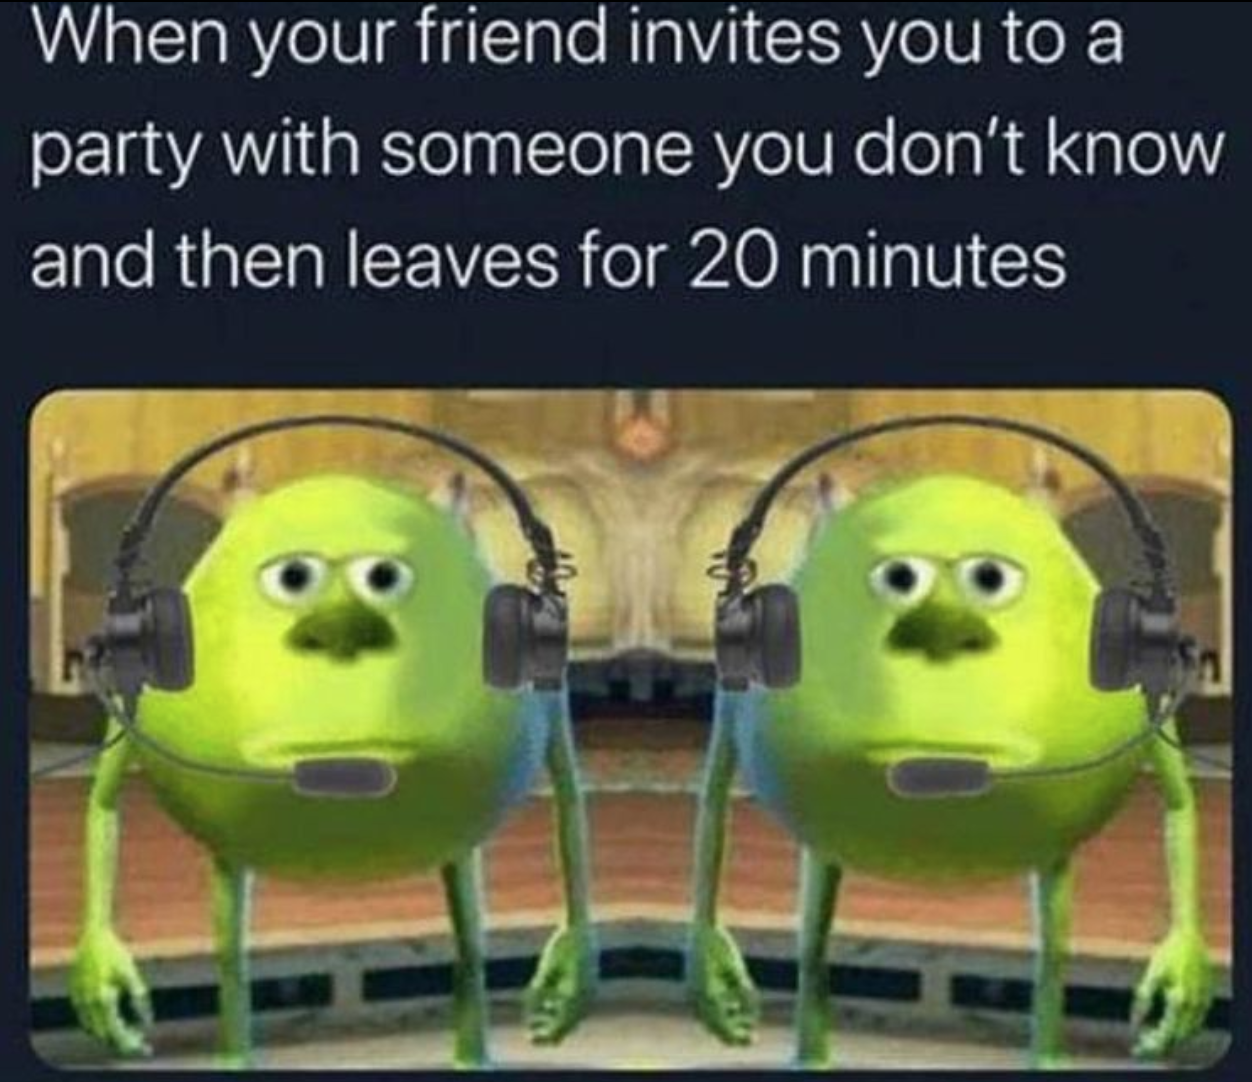 funny gaming memes - xbox players meme - When your friend invites you to a party with someone you don't know and then leaves for 20 minutes